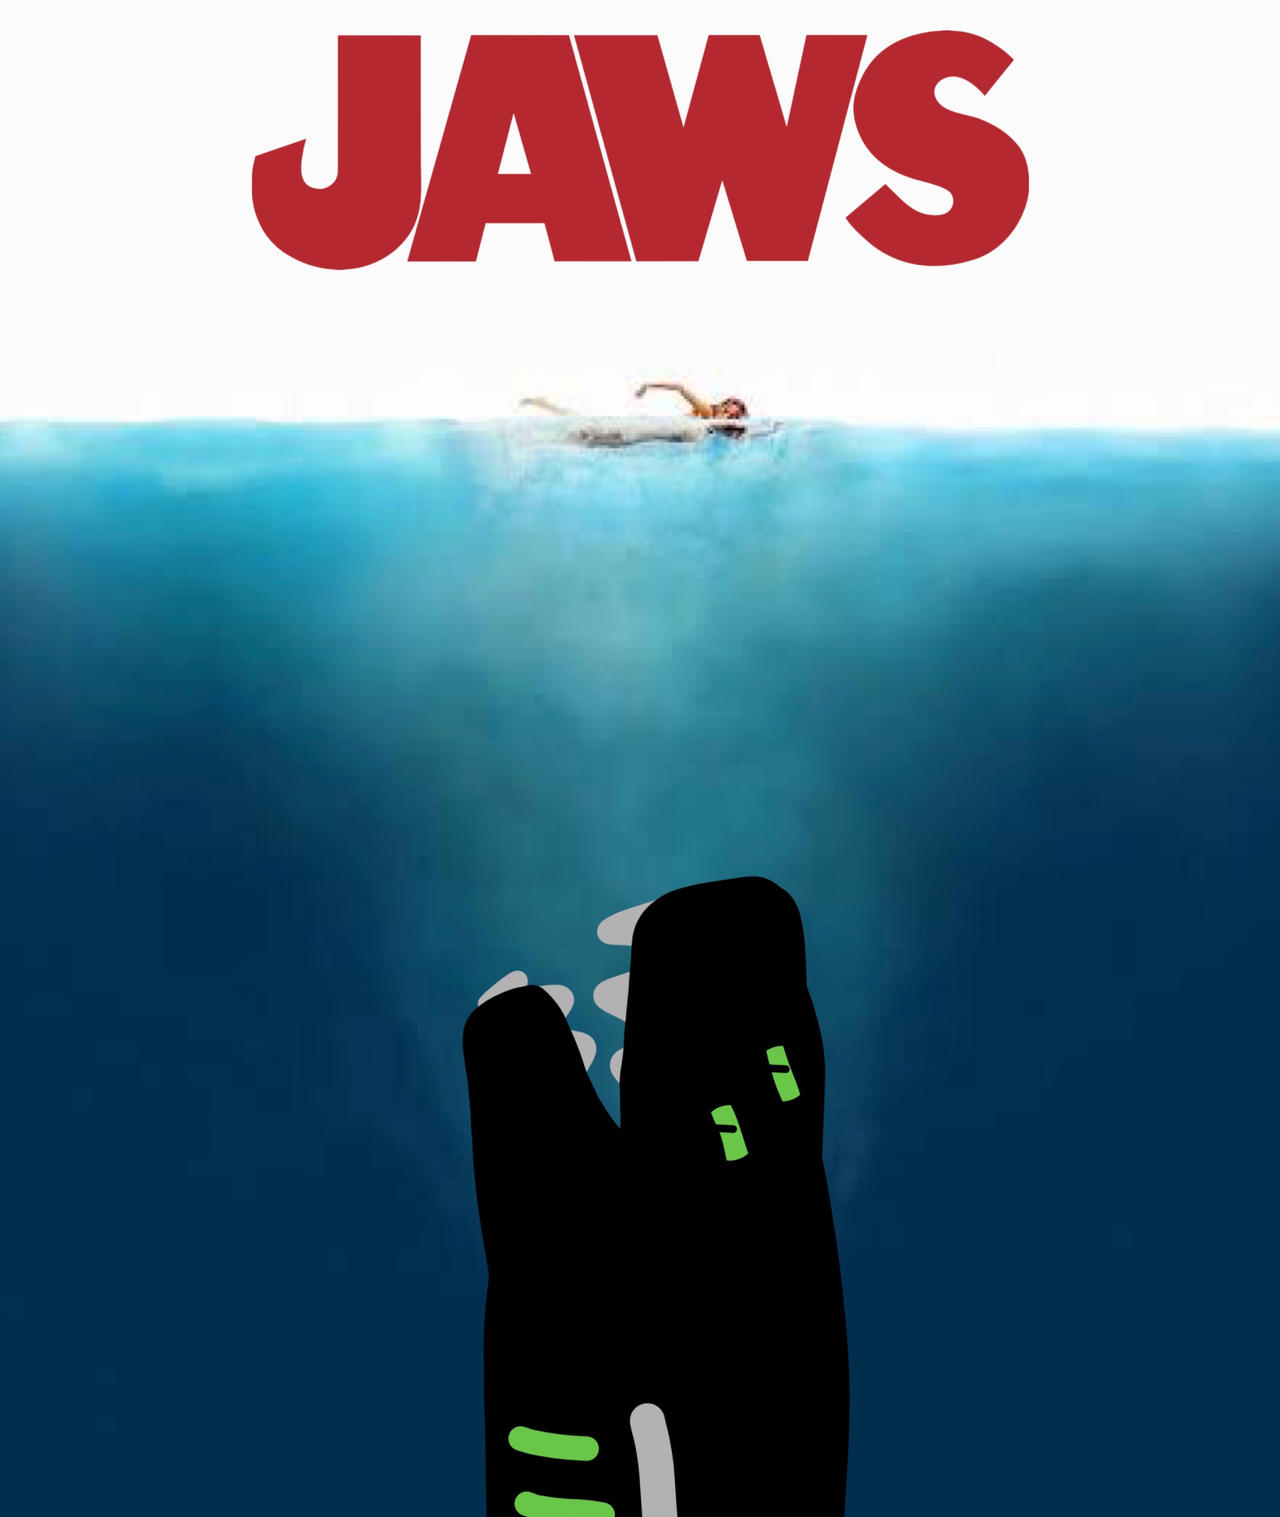 Jaws but with a green tip devil shark by darkdragon992 on DeviantArt